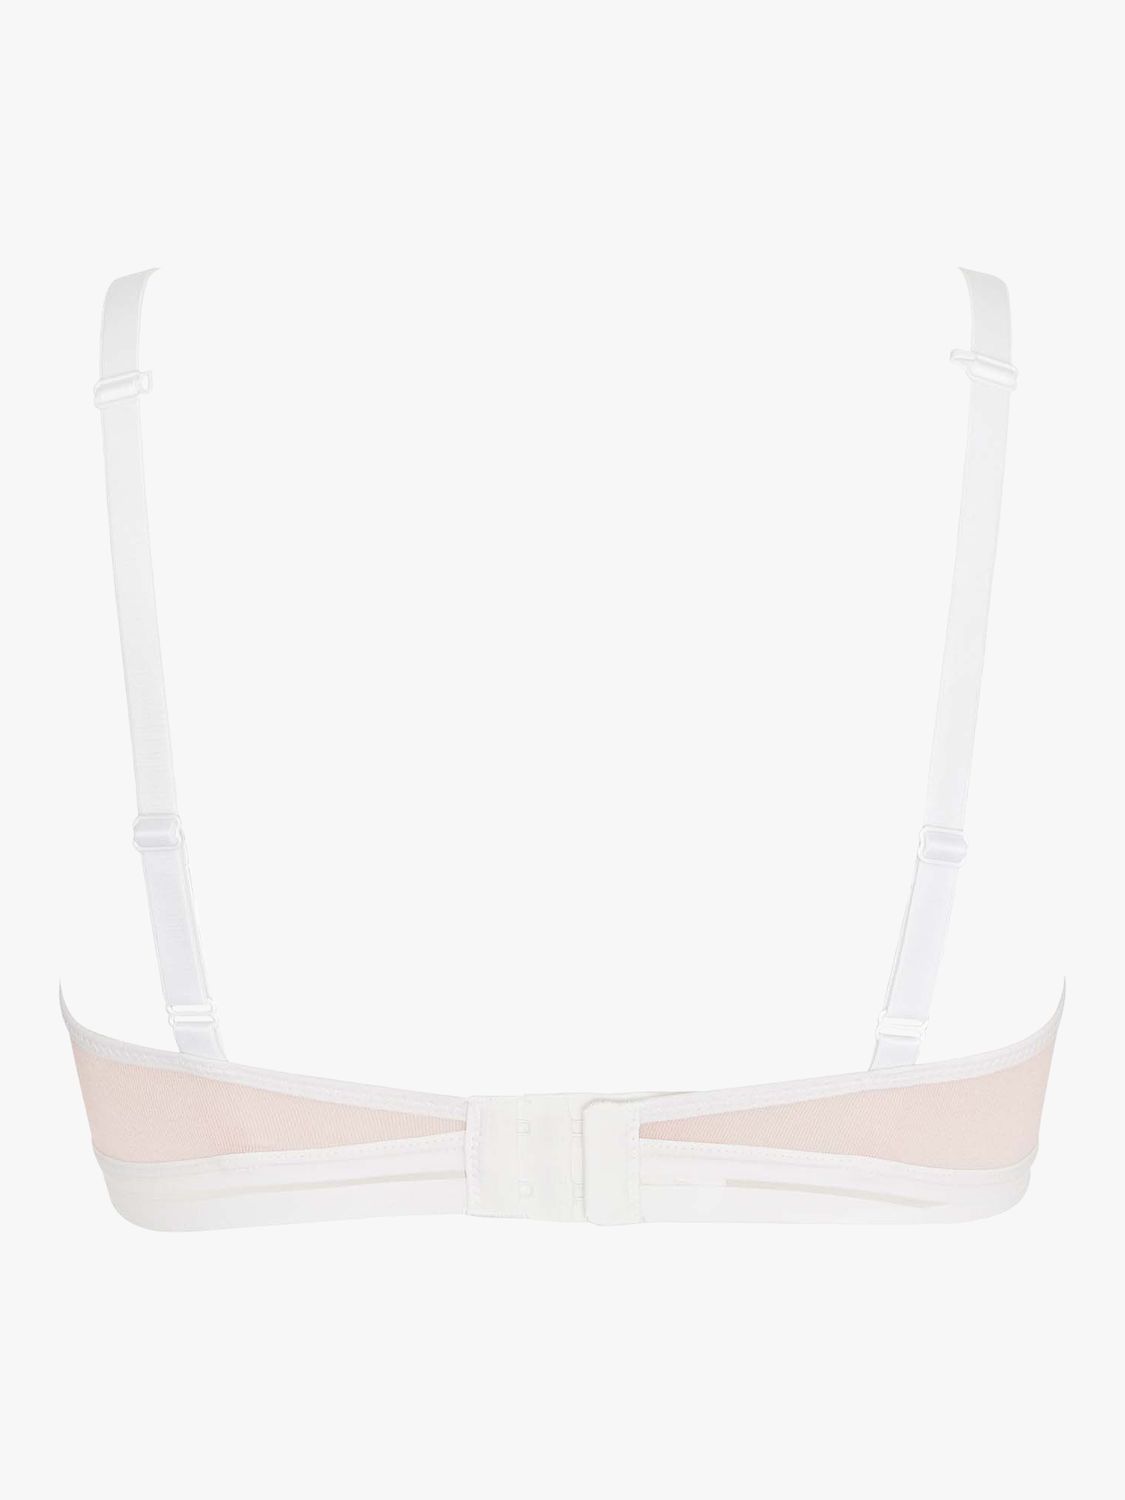 Royce Posie Moulded T-Shirt Non-Wired Bras, Pack of 2, Blush/Grey at John  Lewis & Partners